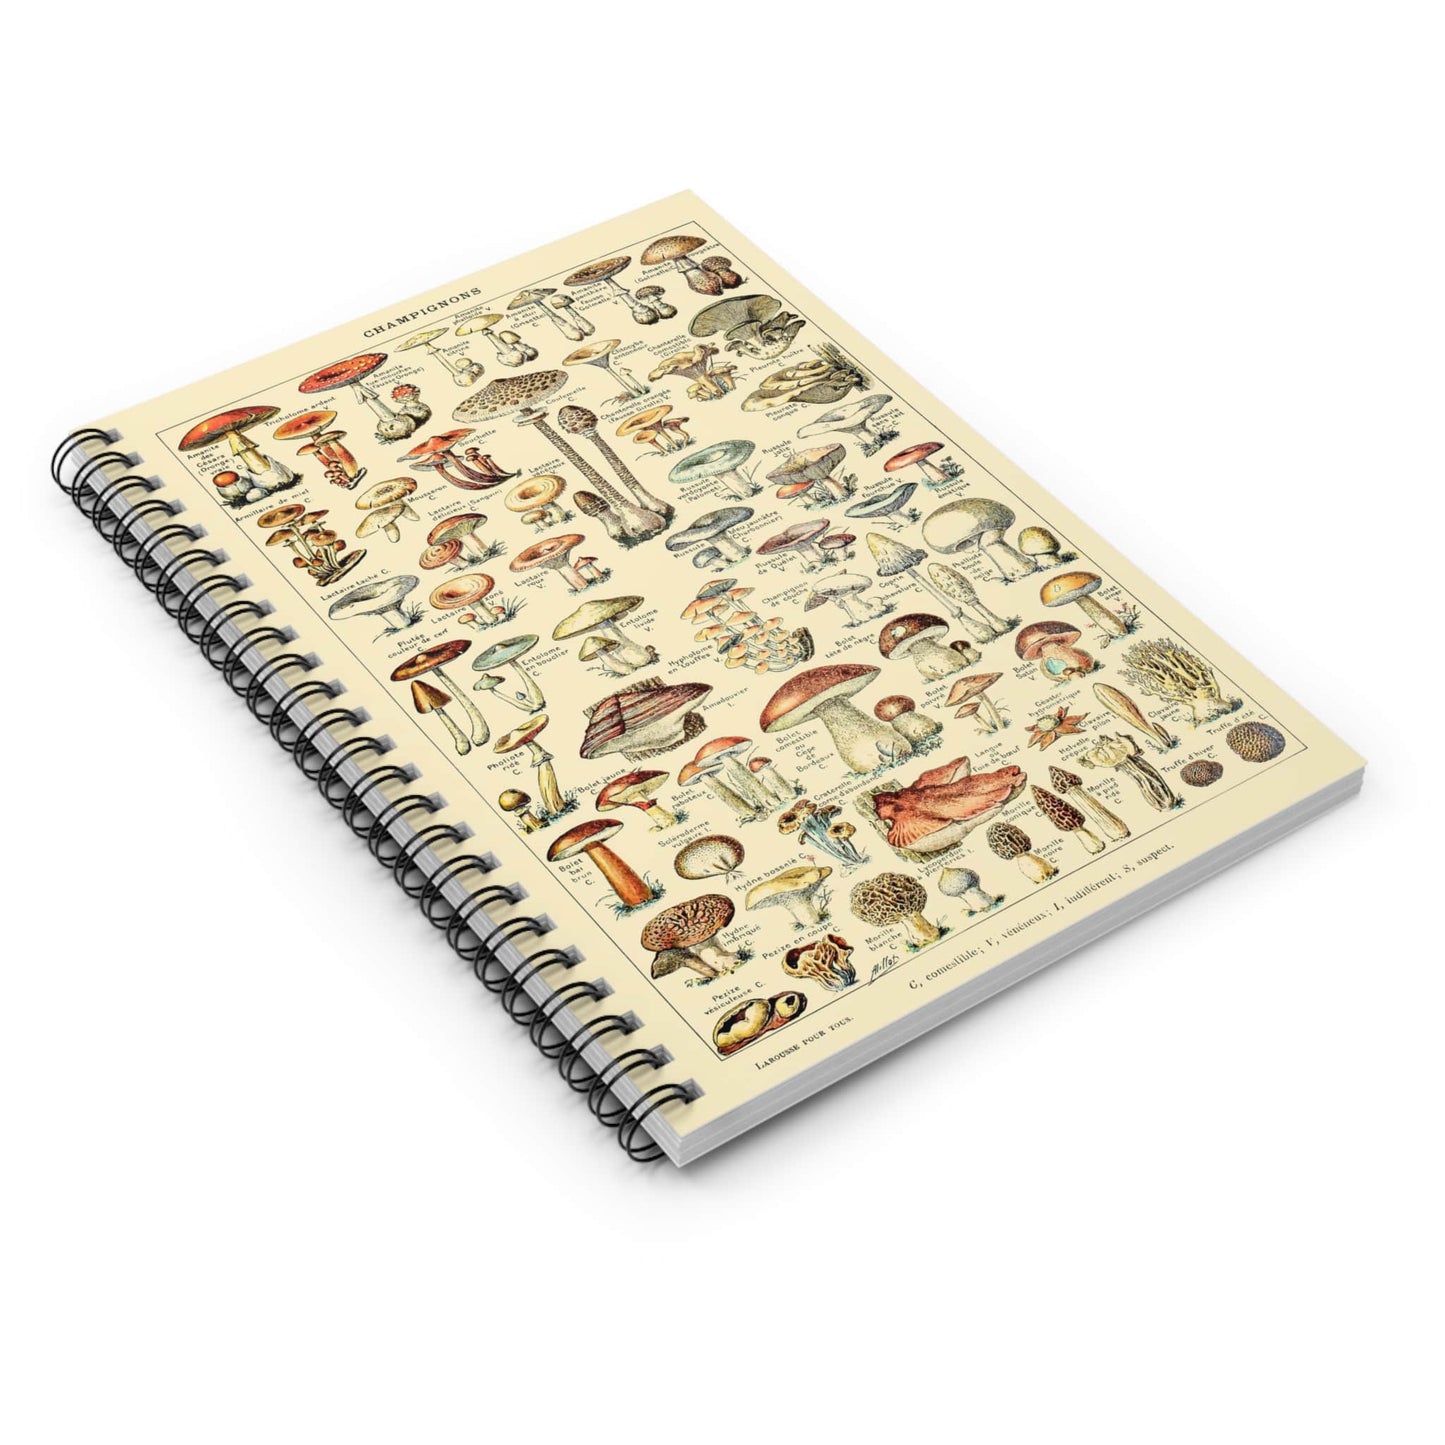 Mushroom Spiral Notebook Laying Flat on White Surface